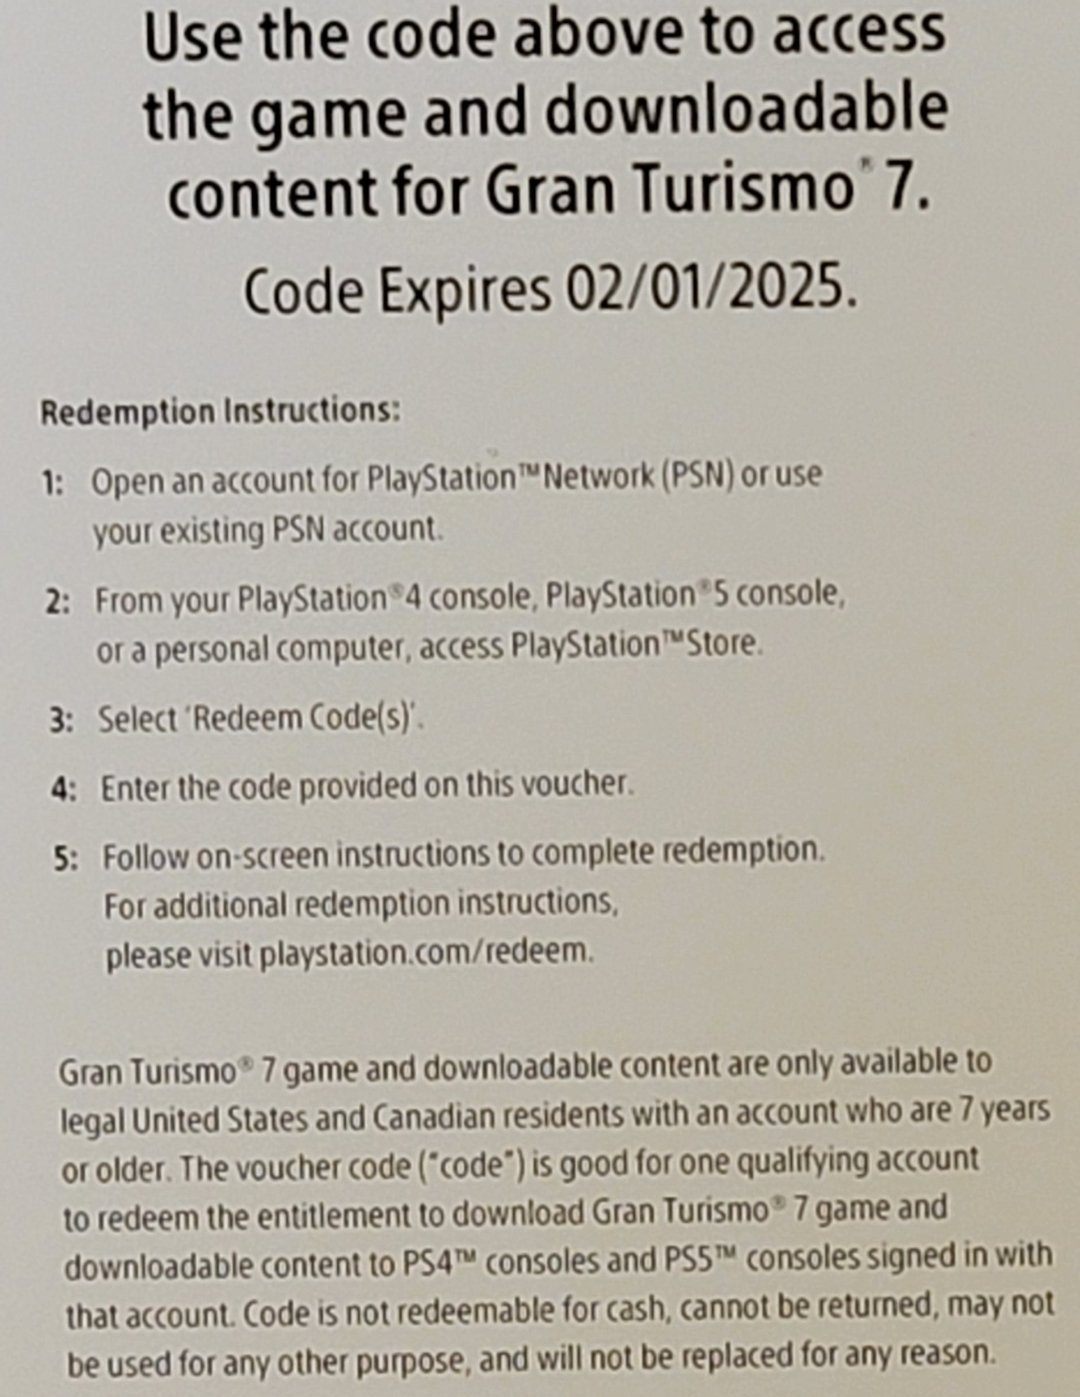 Alex Wentzell on X: I'm giving away a PS4 digital copy of Gran Turismo 7  wirh all of the Anniversary Edition content including 1M credits. This  version CANNOT be upgraded to PS5